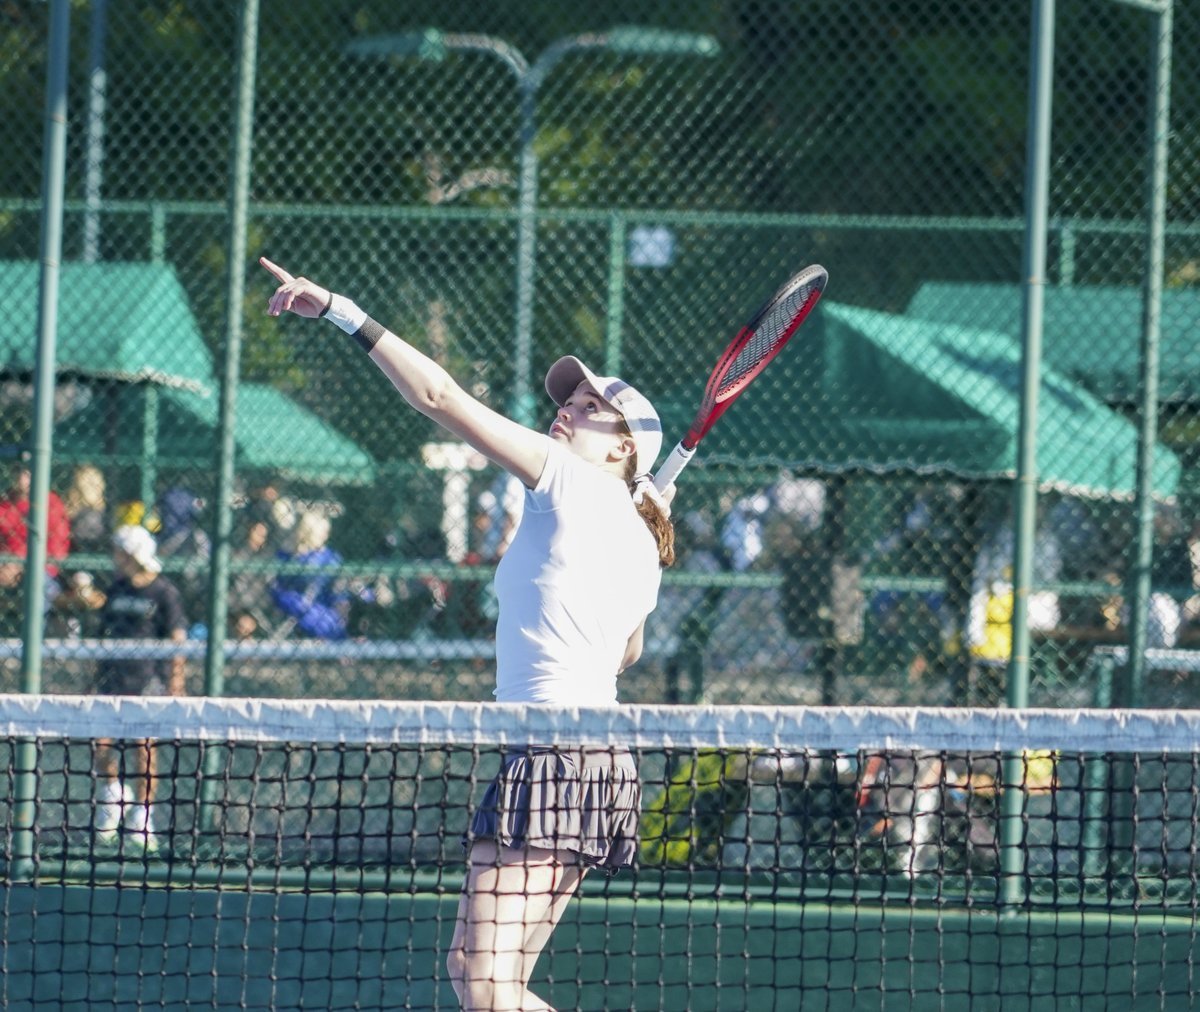 Keep up with all the brackets and scores at the State Tennis Tournament by viewing the online brackets Girls - tennisreporting.com/event/brackets… Boys - tennisreporting.com/event/brackets…